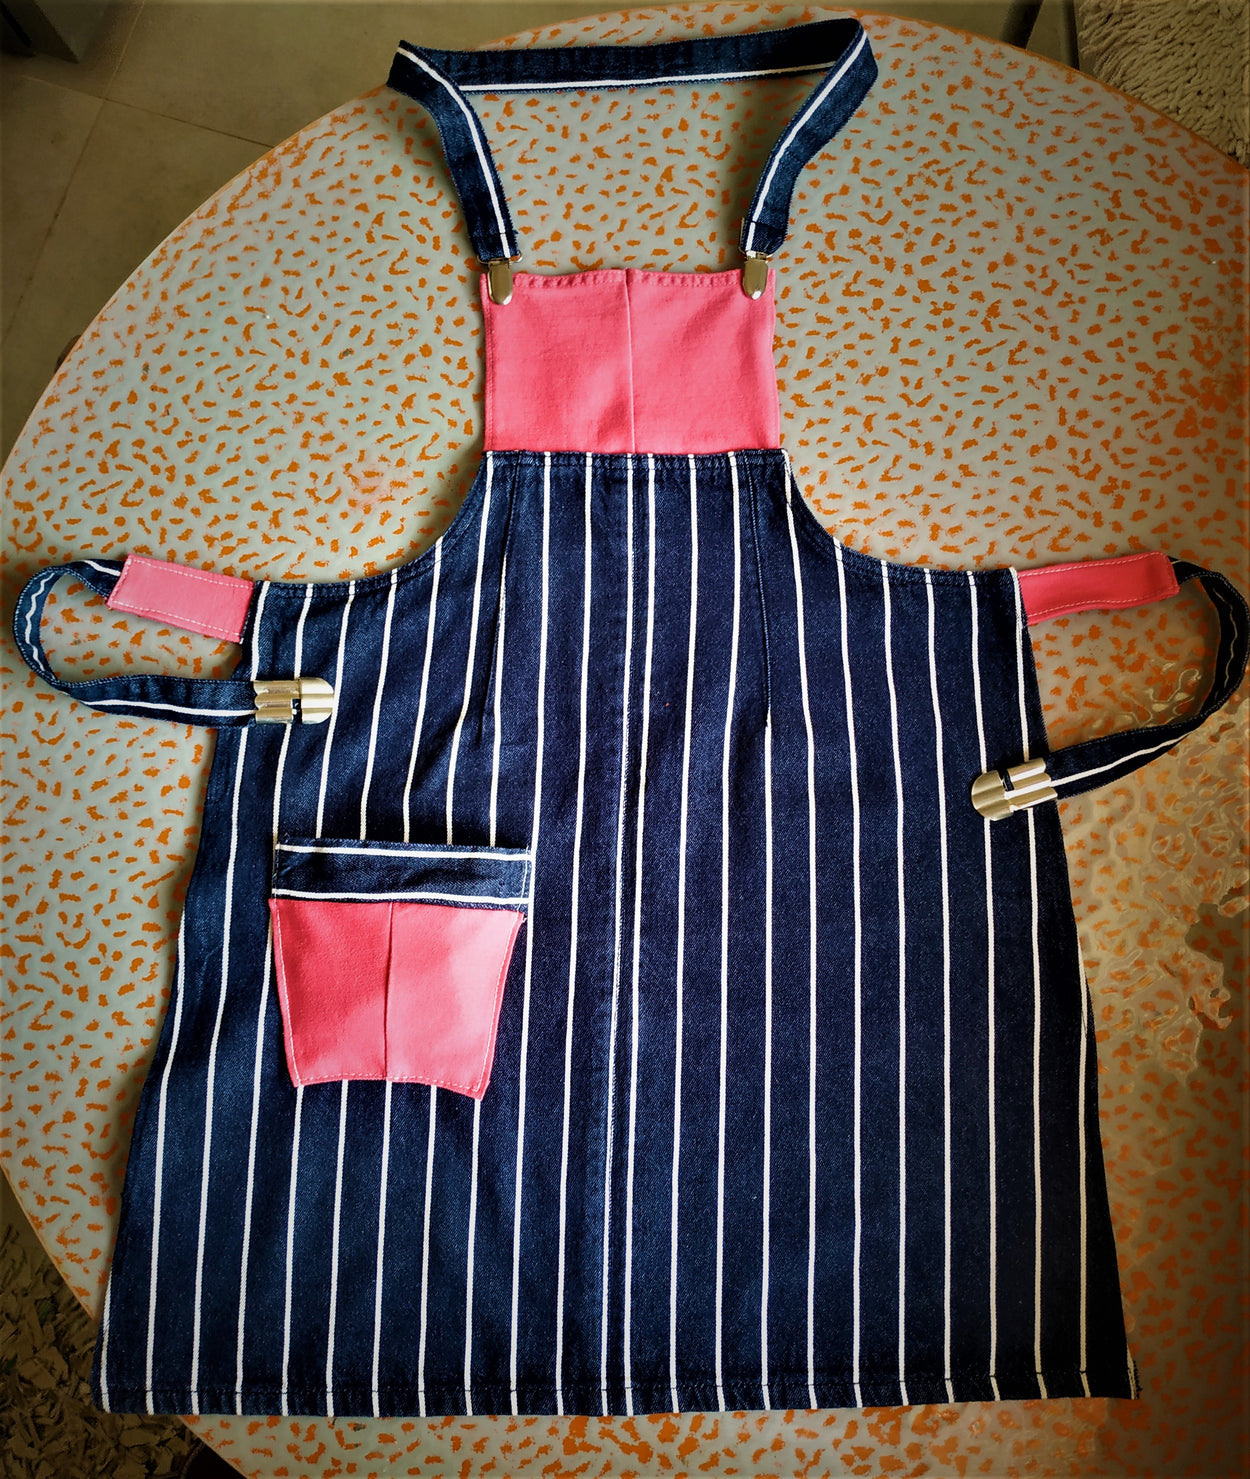 A set of denim aprons for HER and HIM.